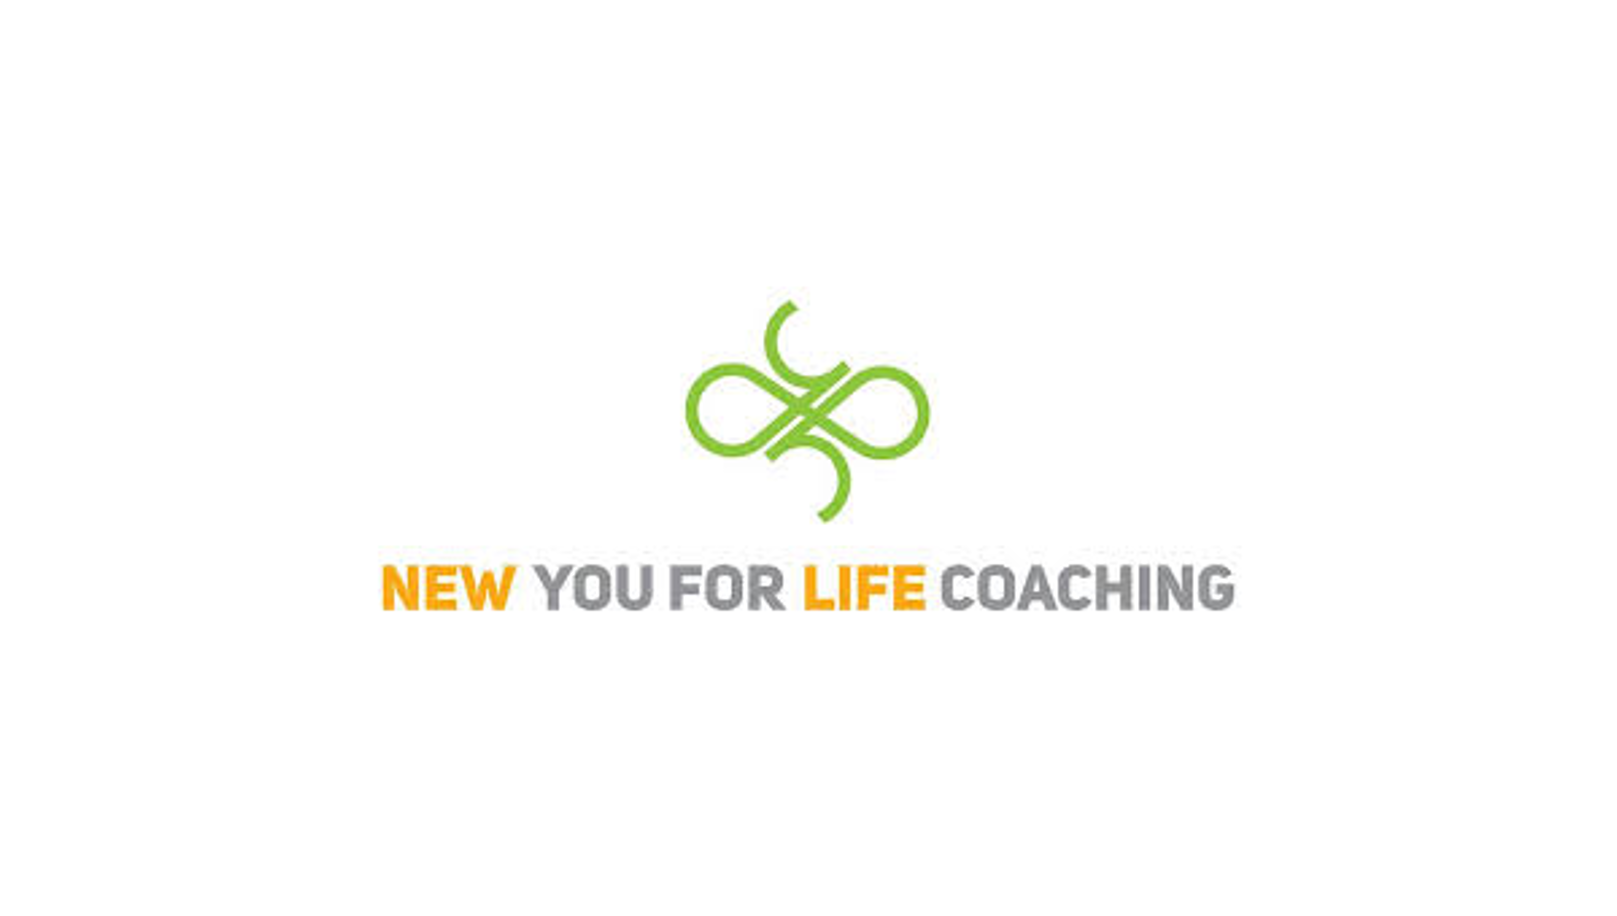 New You For Life Coaching